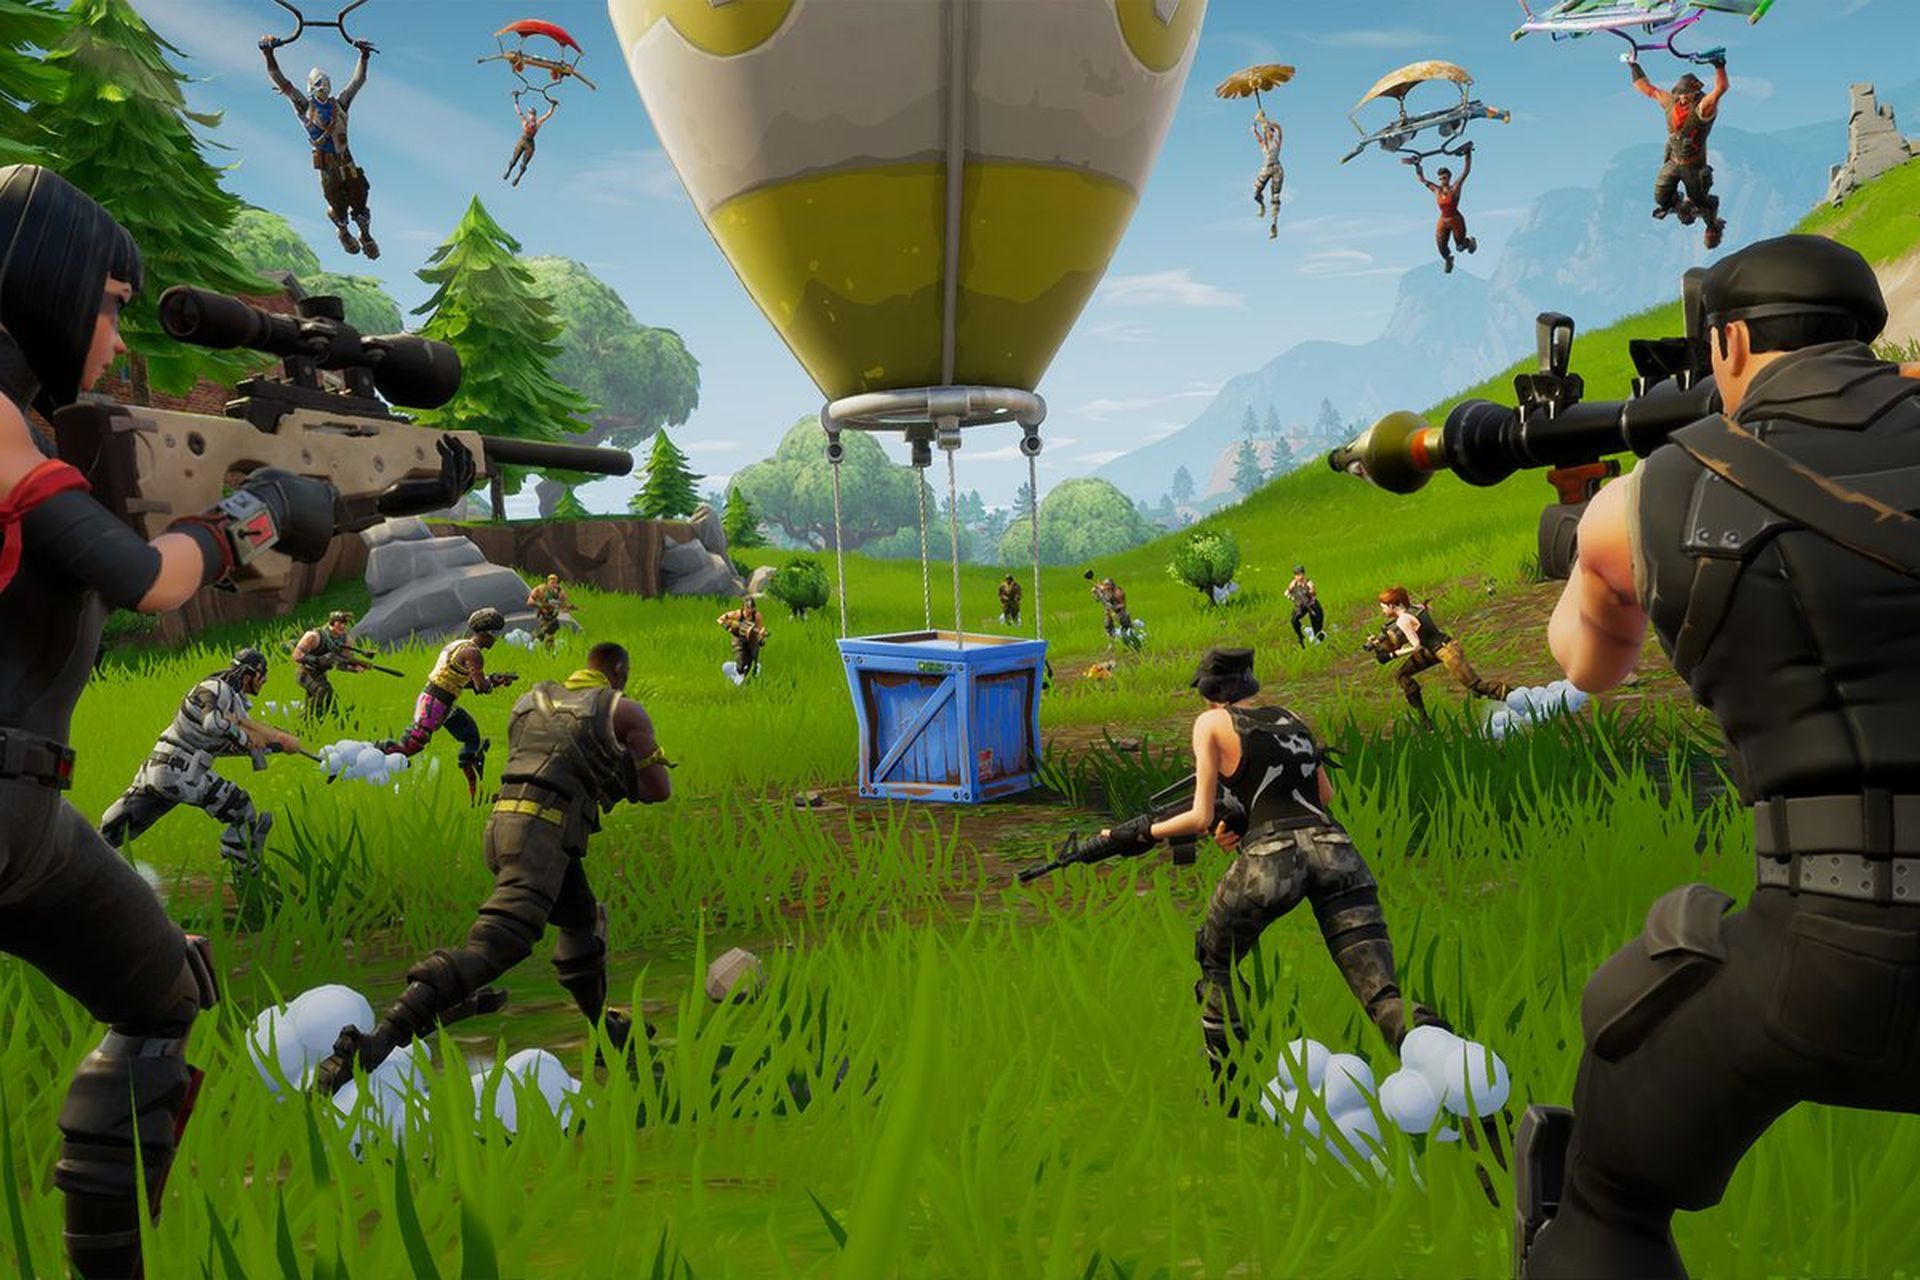 In this article, we are going to go over how to fix Profile query failed Fortnite error, so you can enjoy the popular battle royale game without any problems.